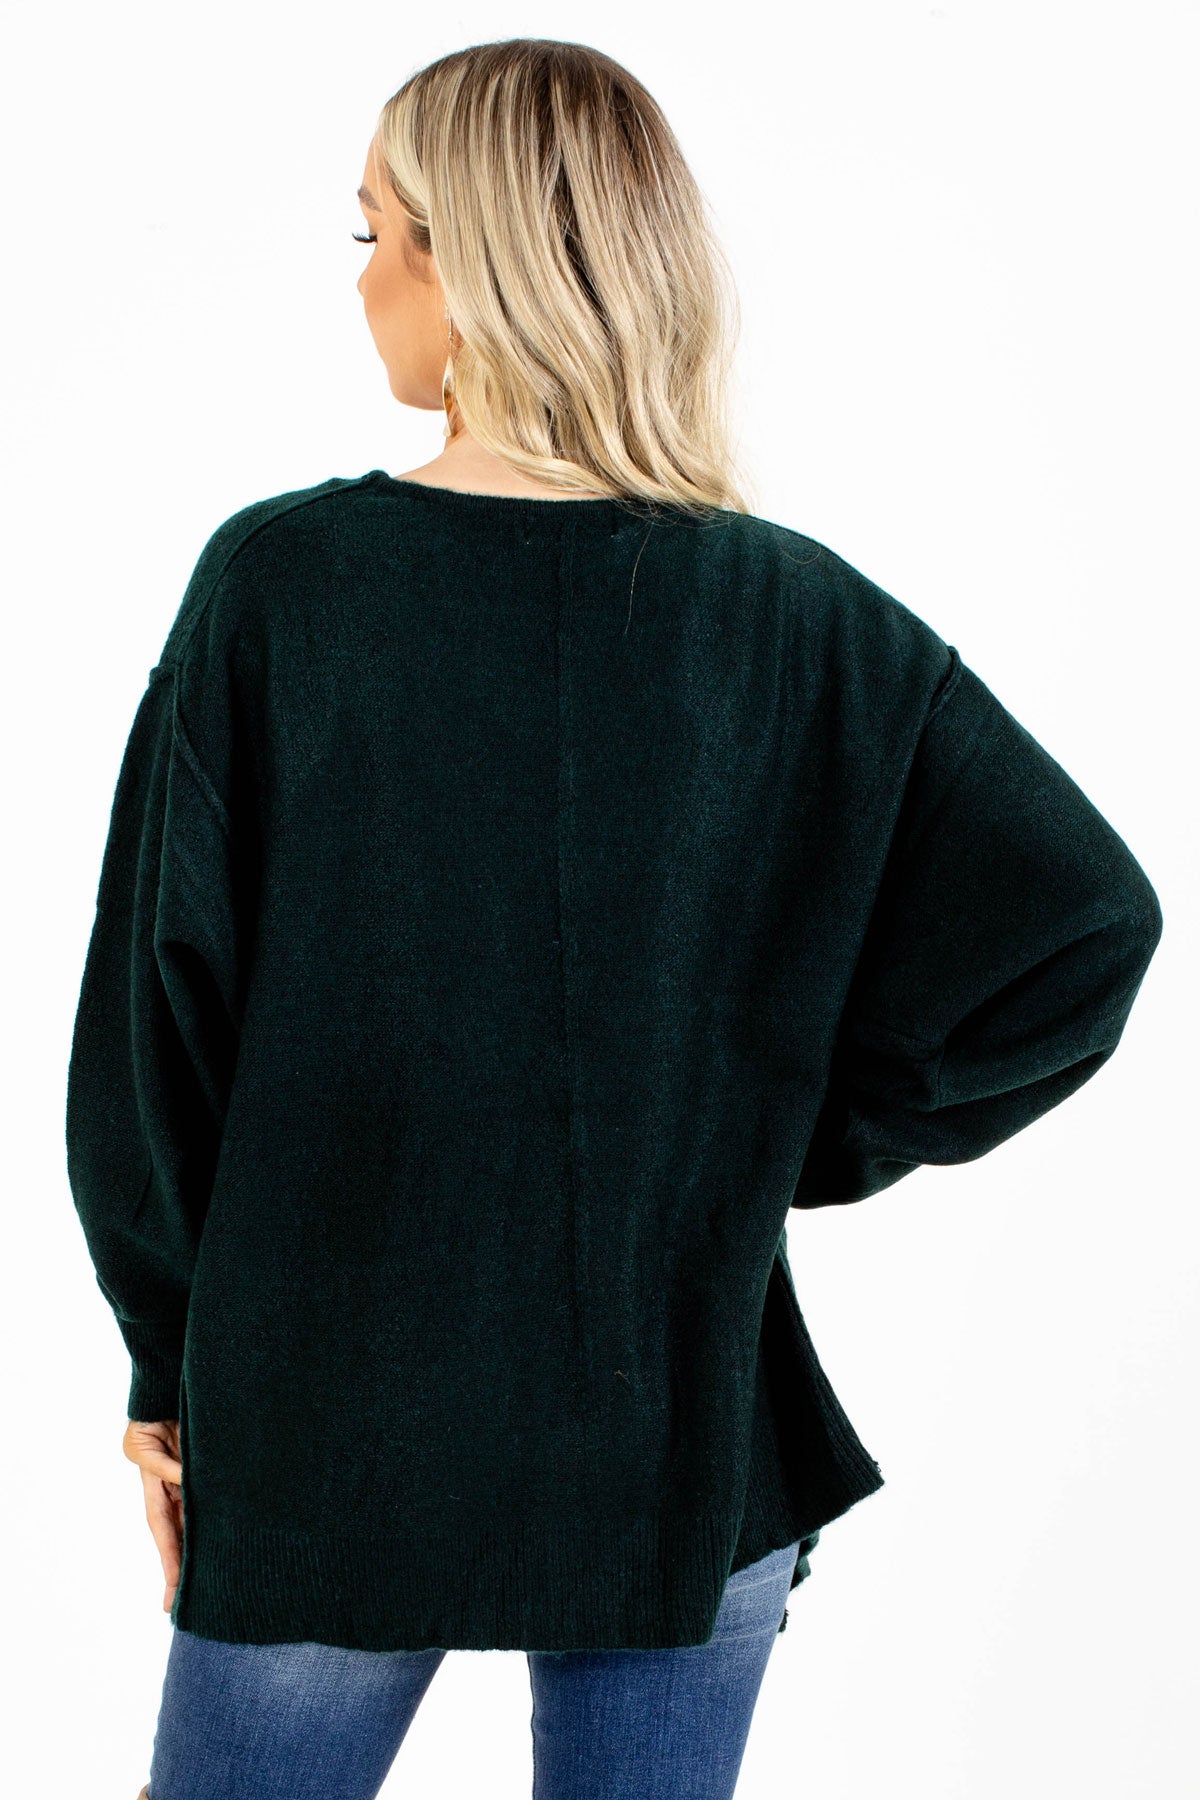 Cozy and Warm Green Cardigan for Women